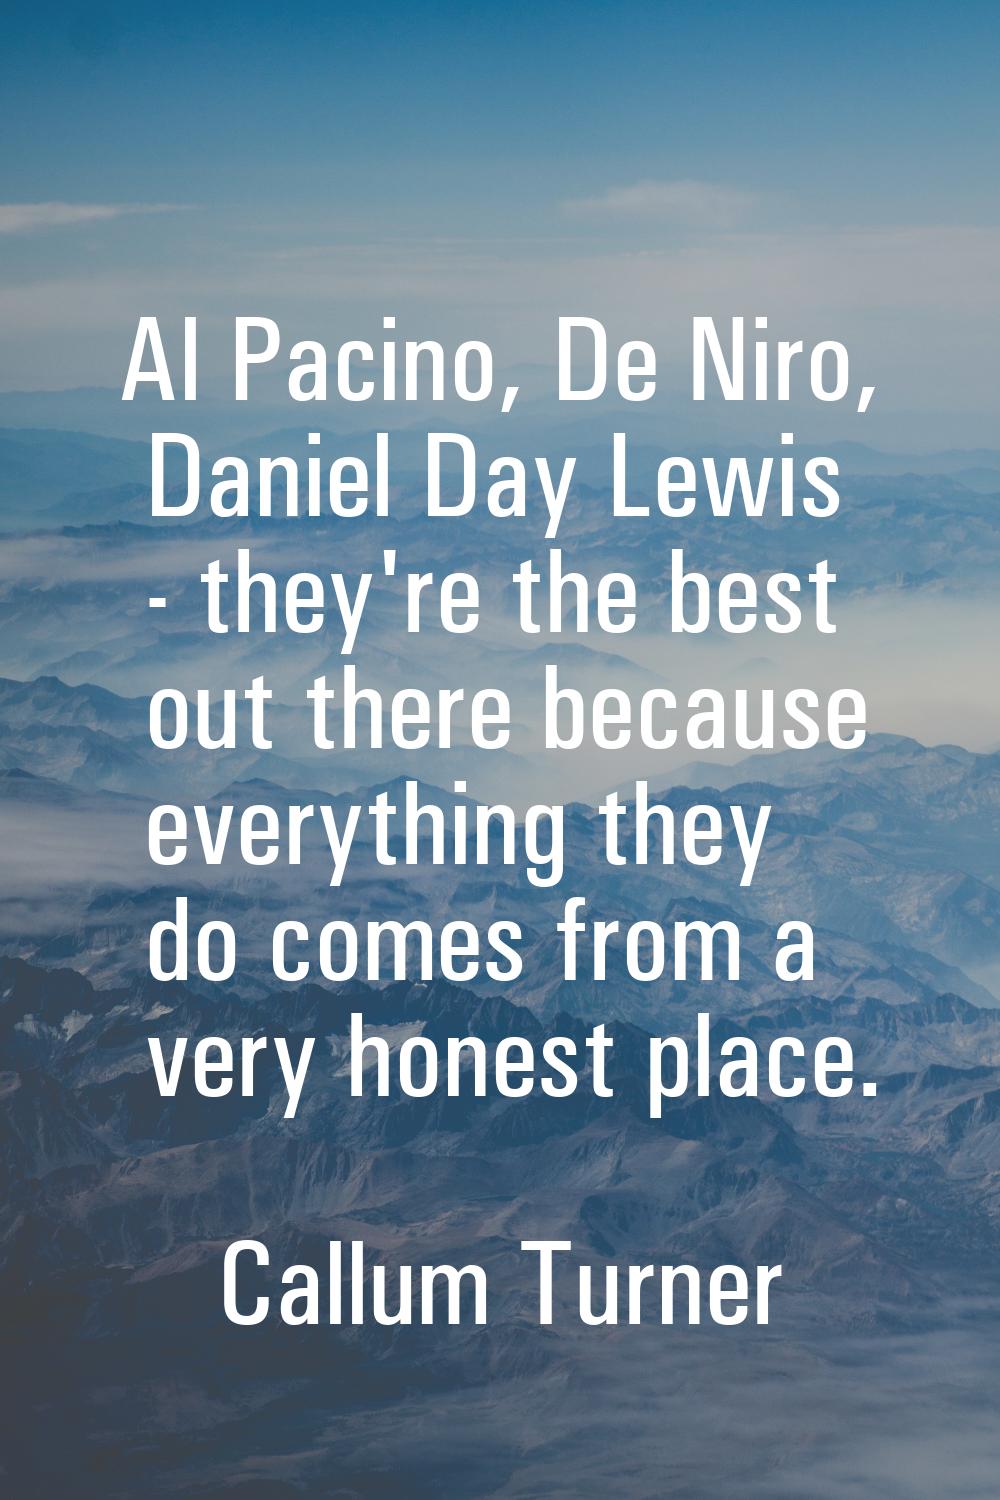 Al Pacino, De Niro, Daniel Day Lewis - they're the best out there because everything they do comes 